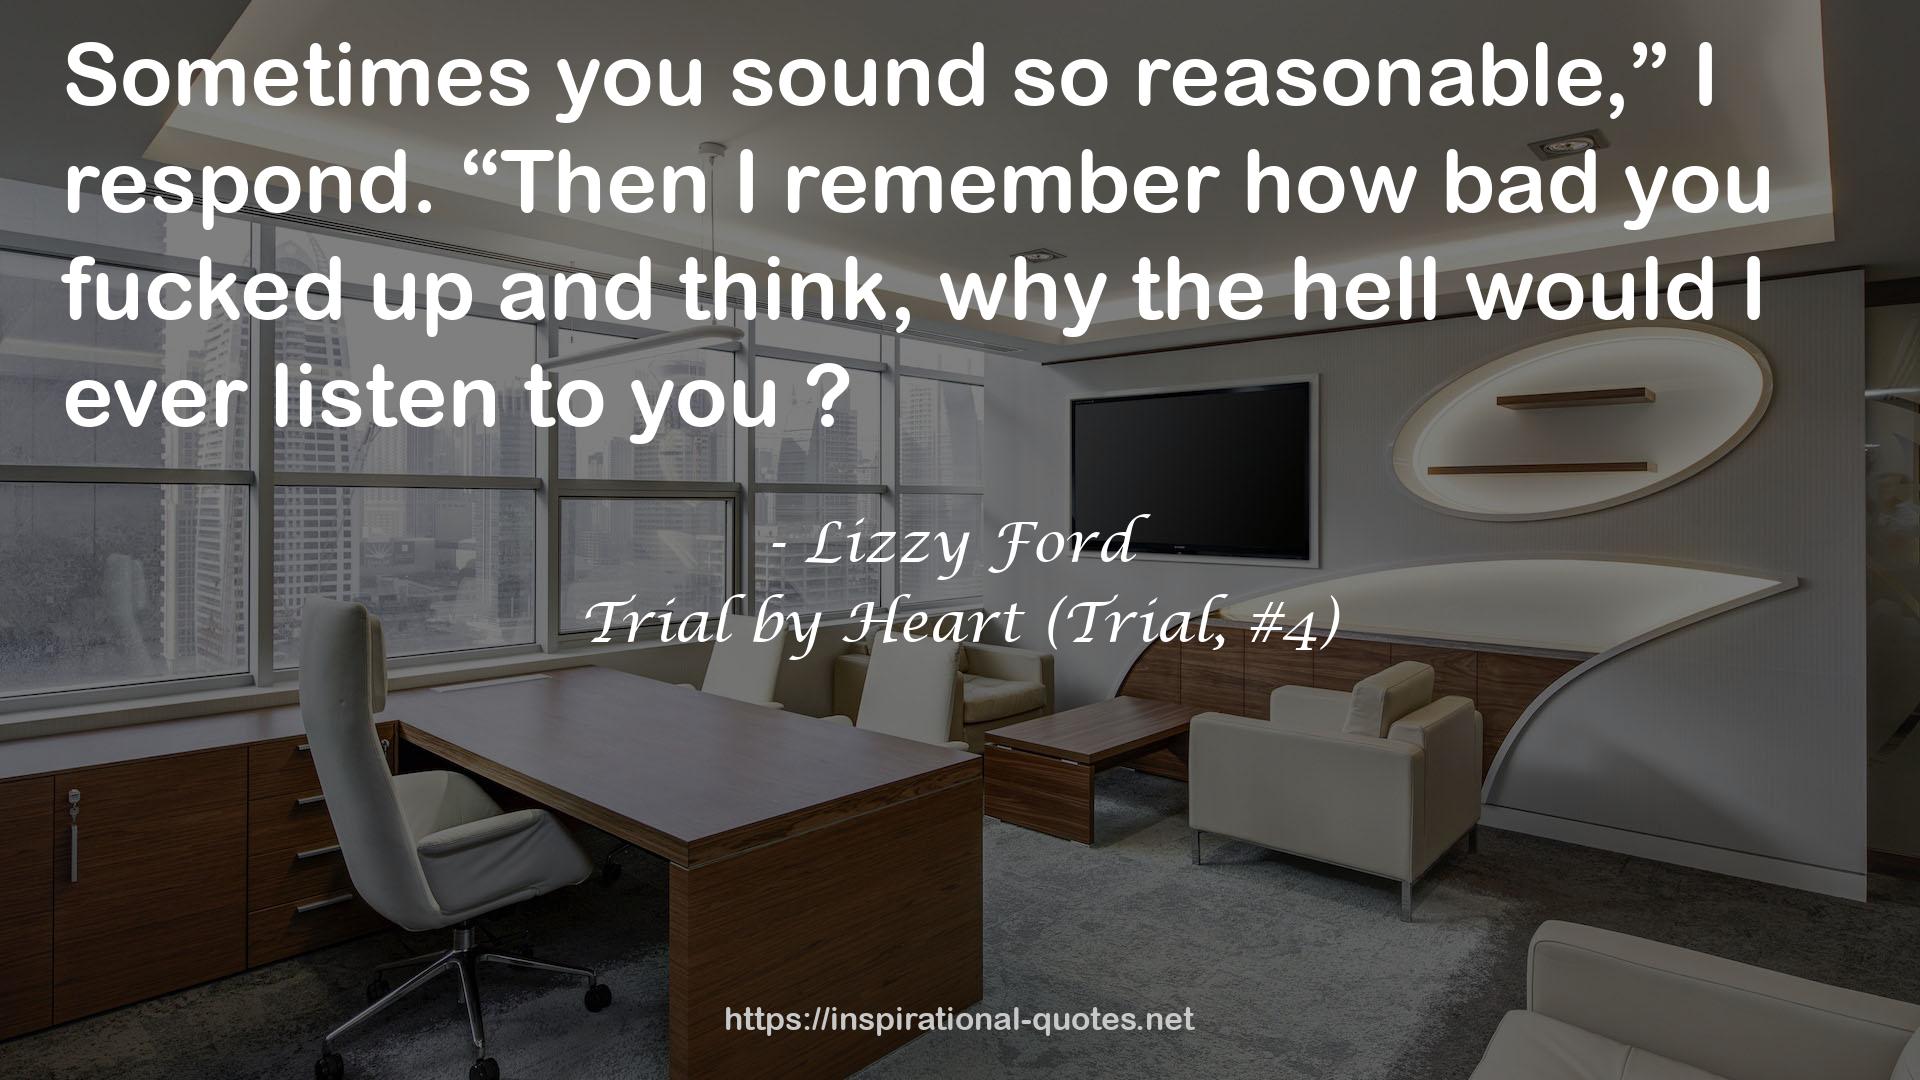 Trial by Heart (Trial, #4) QUOTES